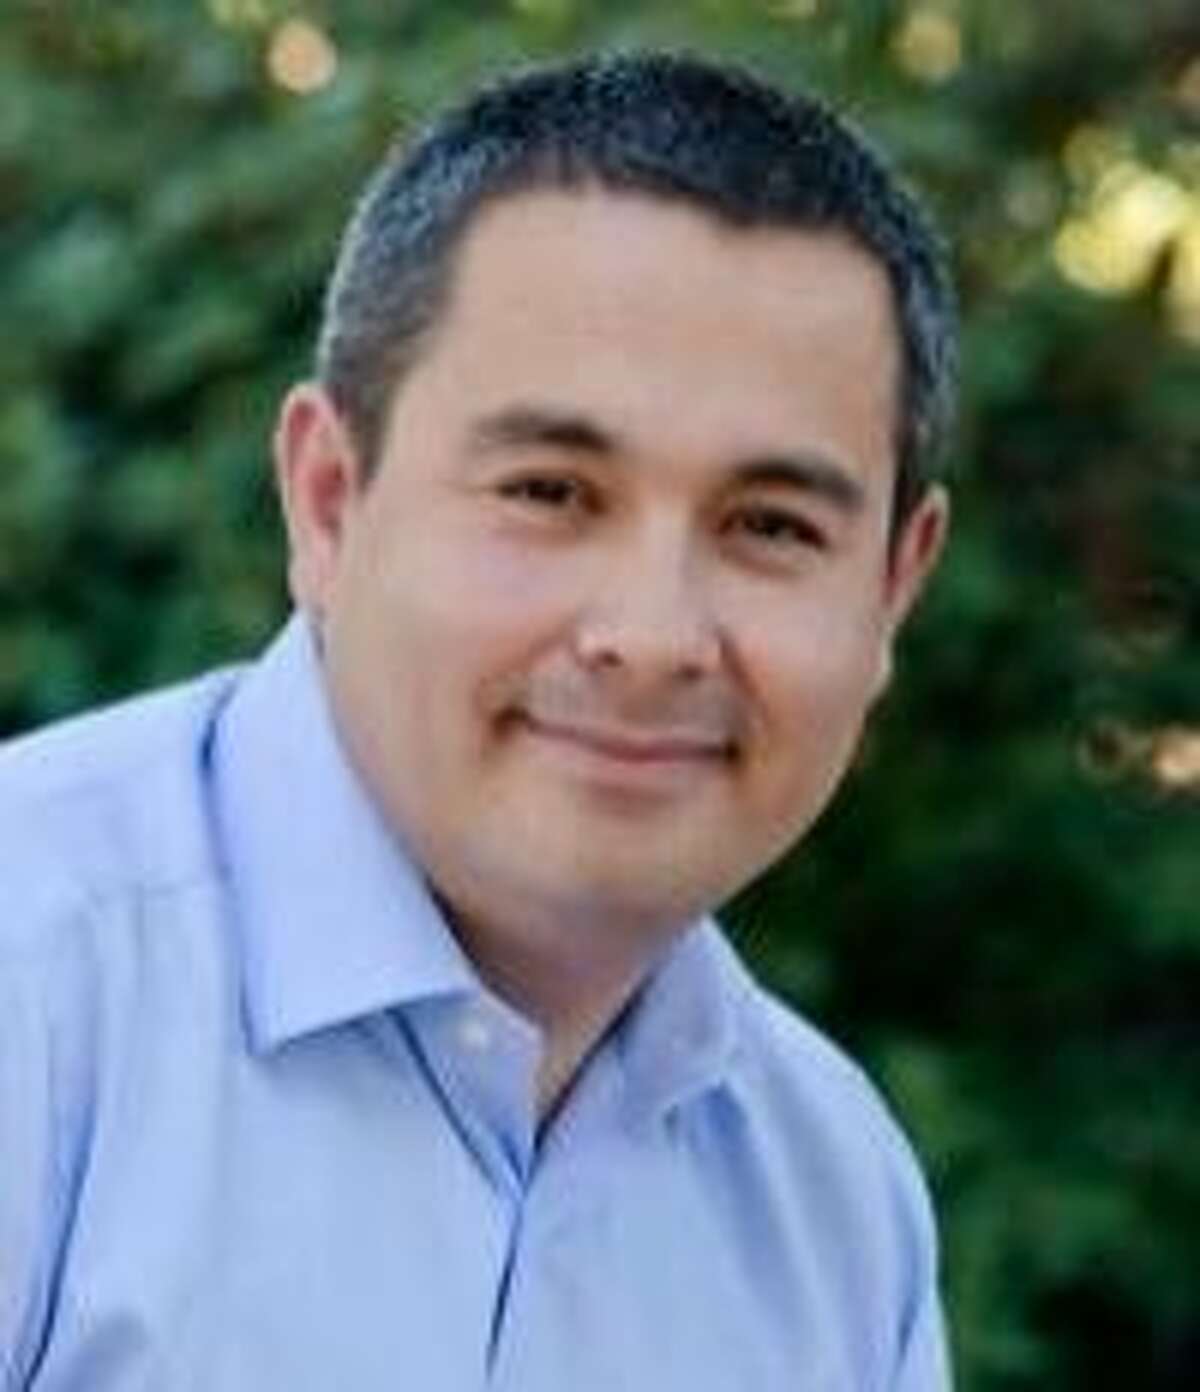 Victor A. Rodriguez, 42, of Oakland, was appointed to a judgeship in the Alameda County Superior Court by Governor Jerry Brown in December 2017.